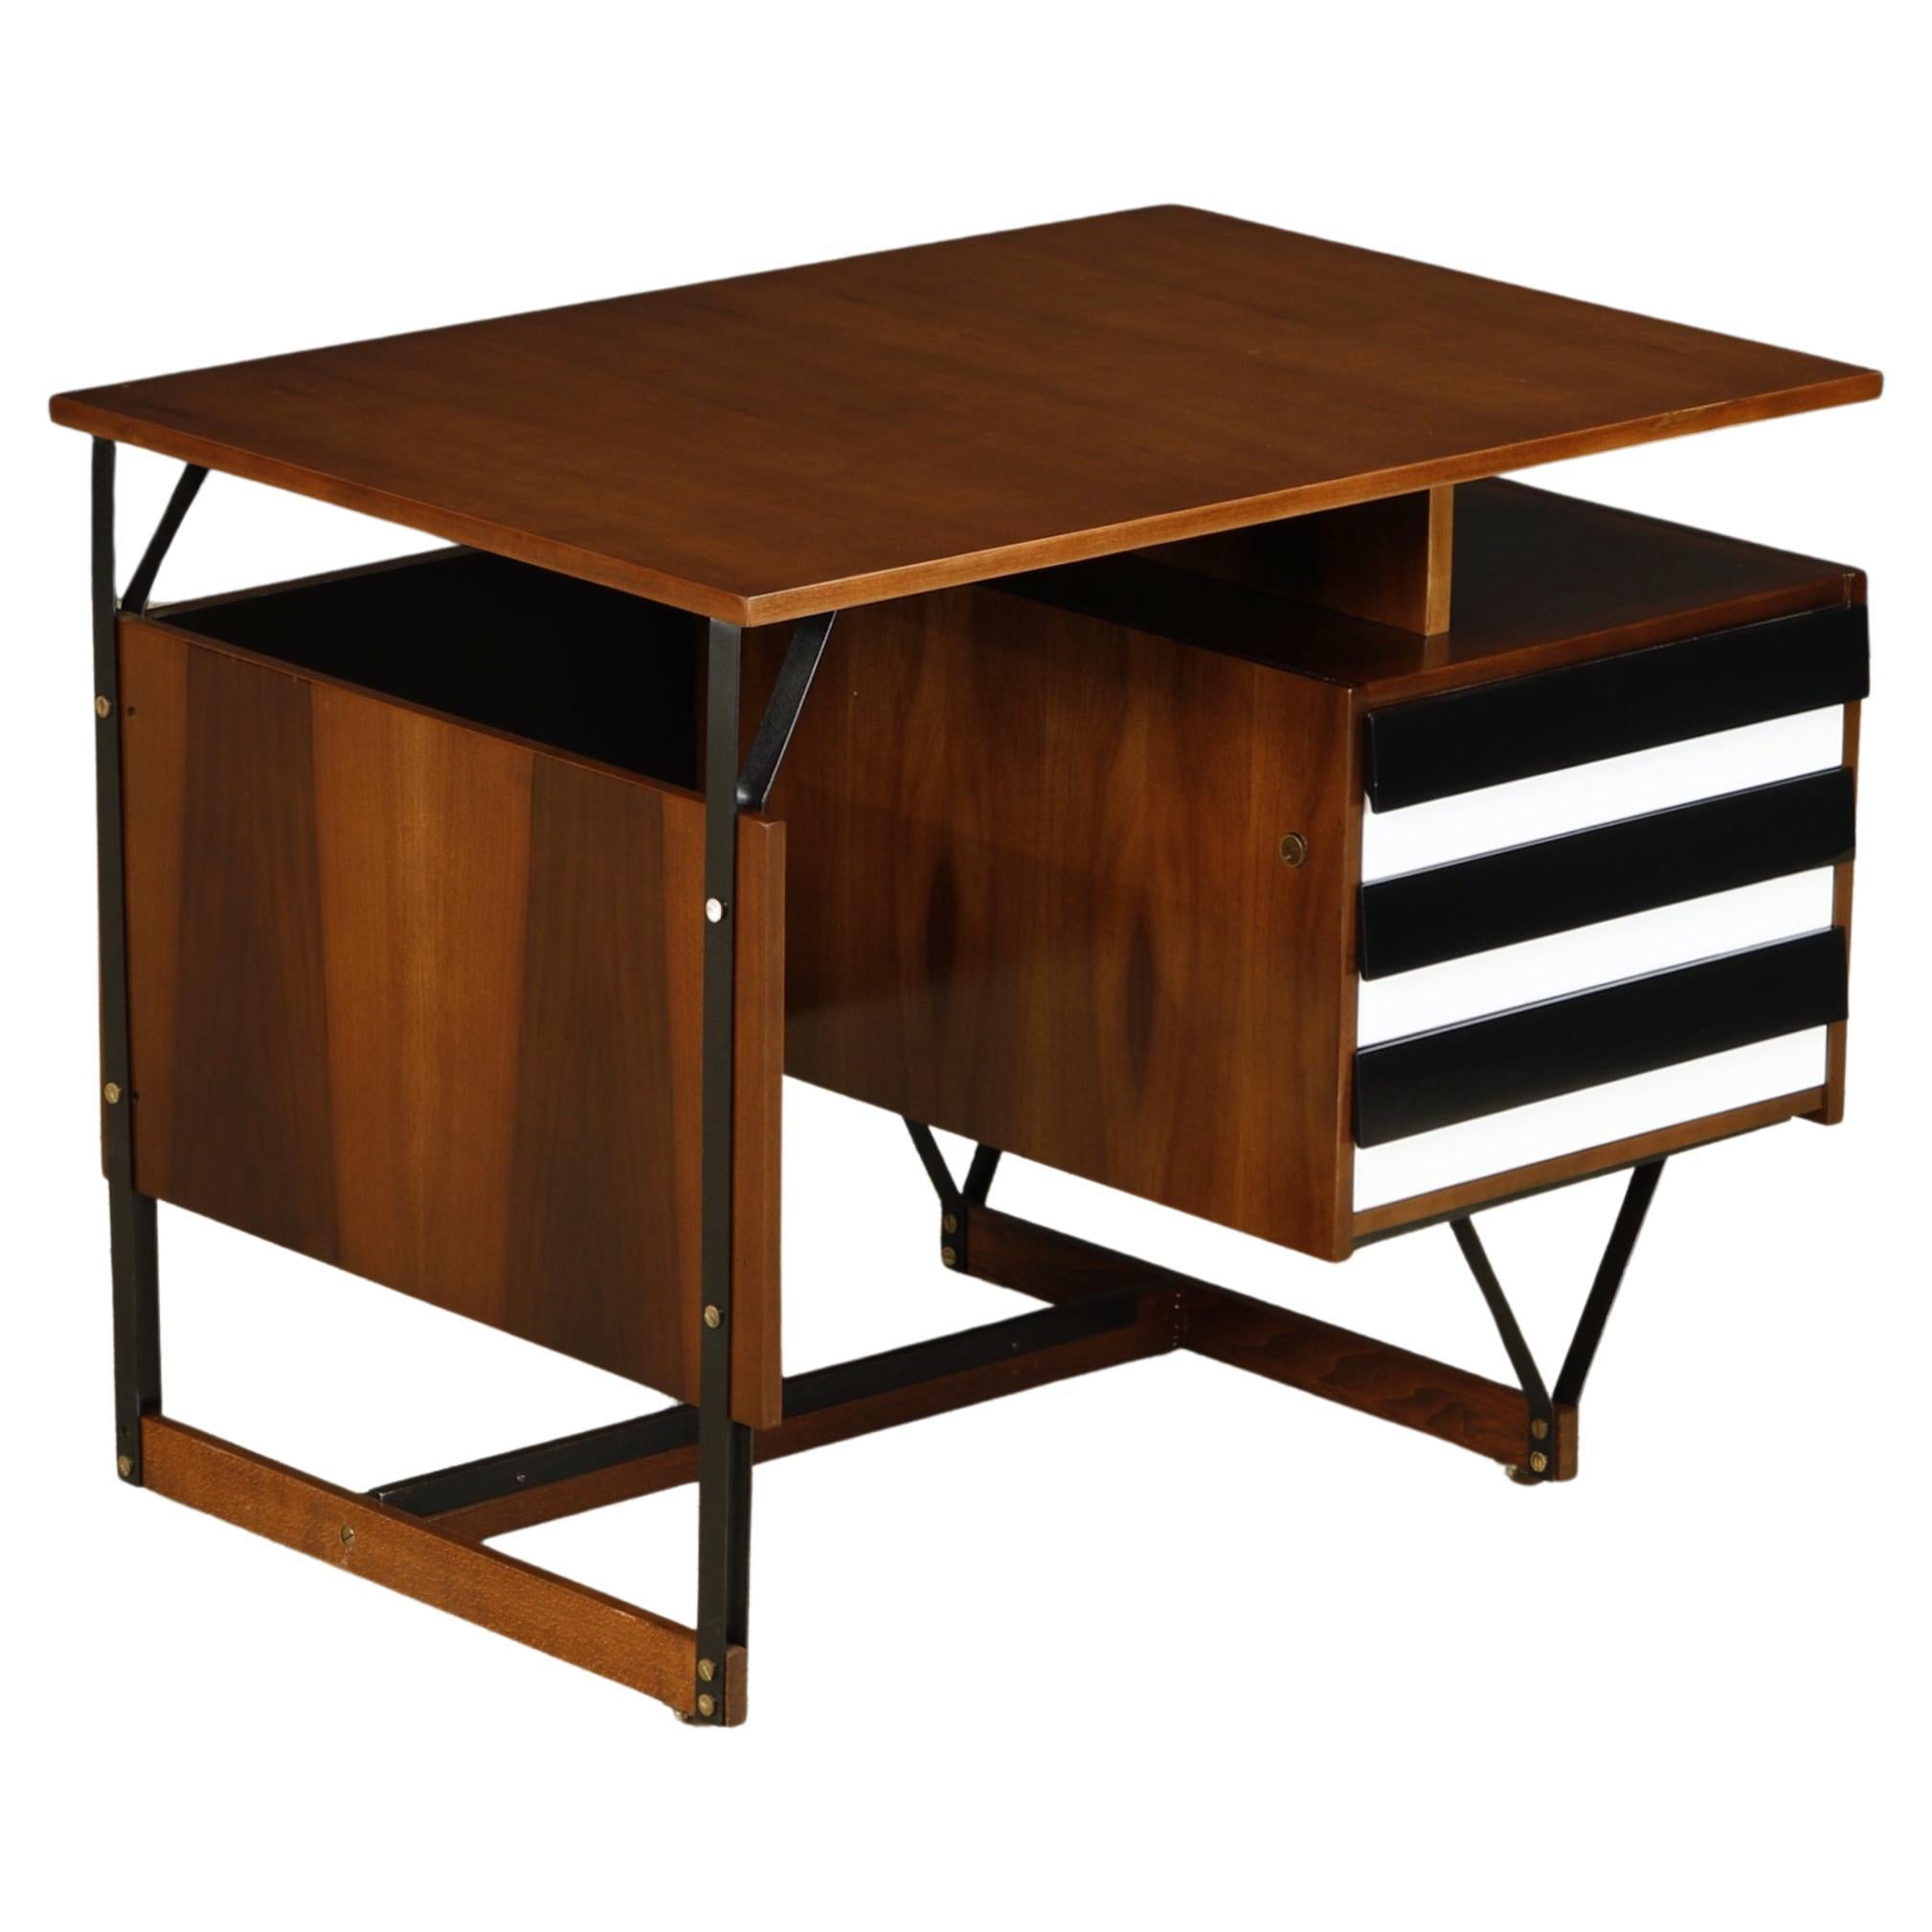 Italian Mid-Century Modern Desk, Style of Gio Ponti, c 1950s, Refinished For Sale